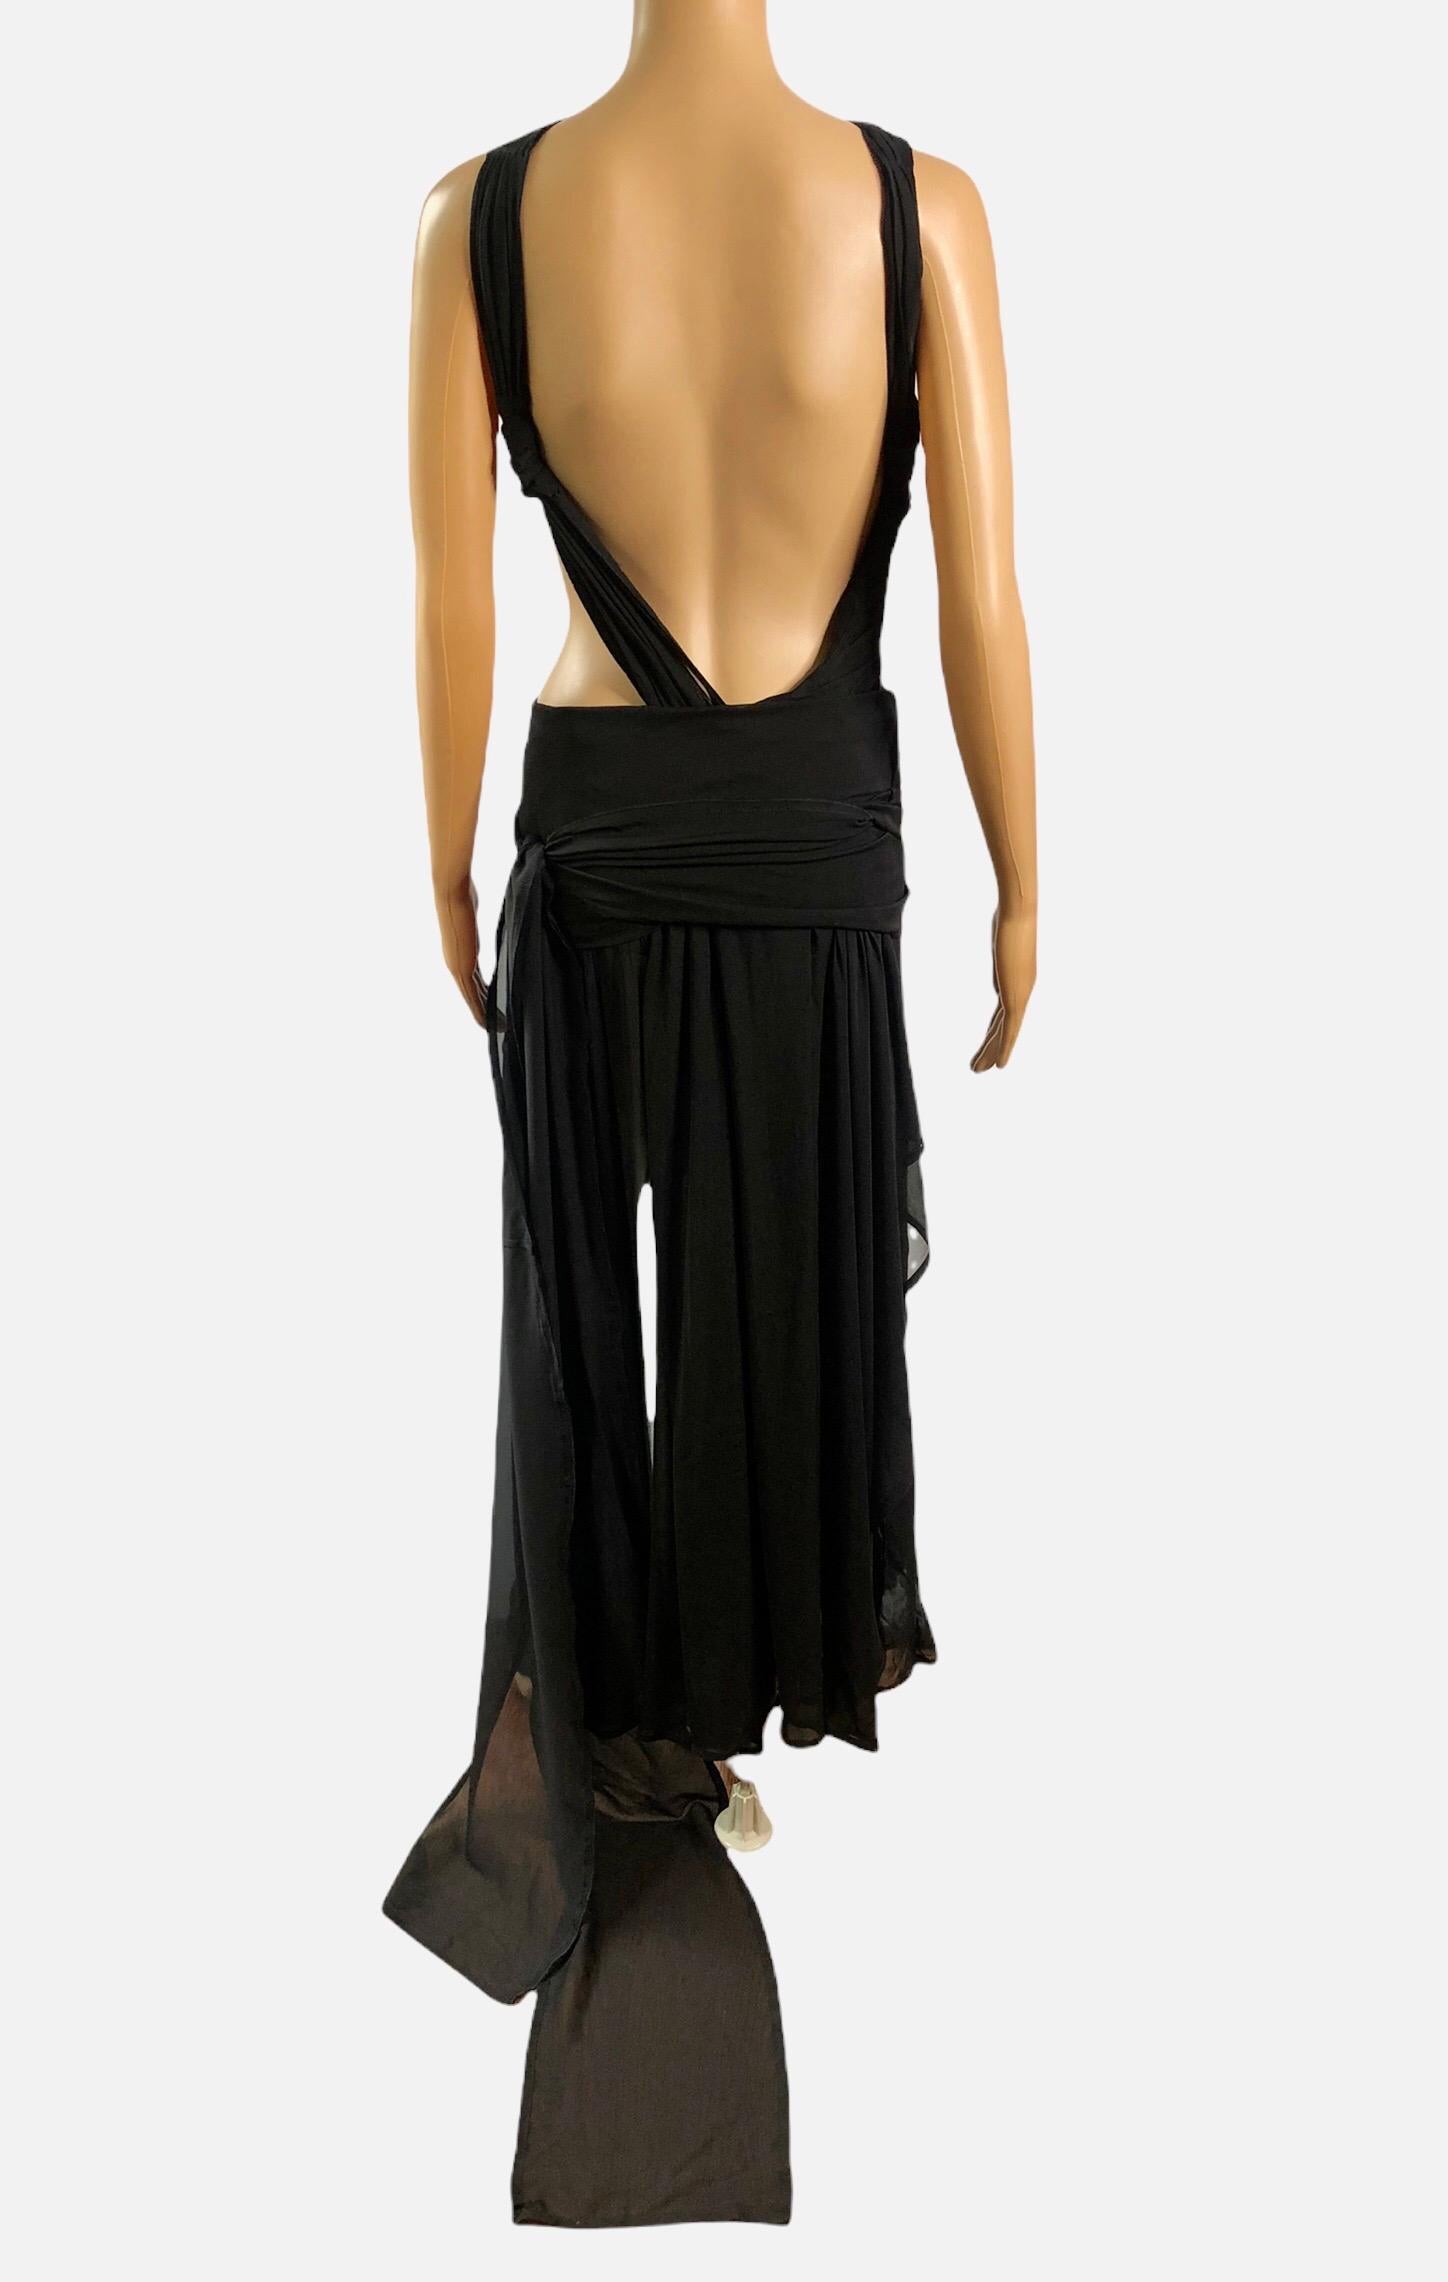 Tom Ford for Yves Saint Laurent S/S 2002 Runway Sheer Cutout Black Dress Gown For Sale 6